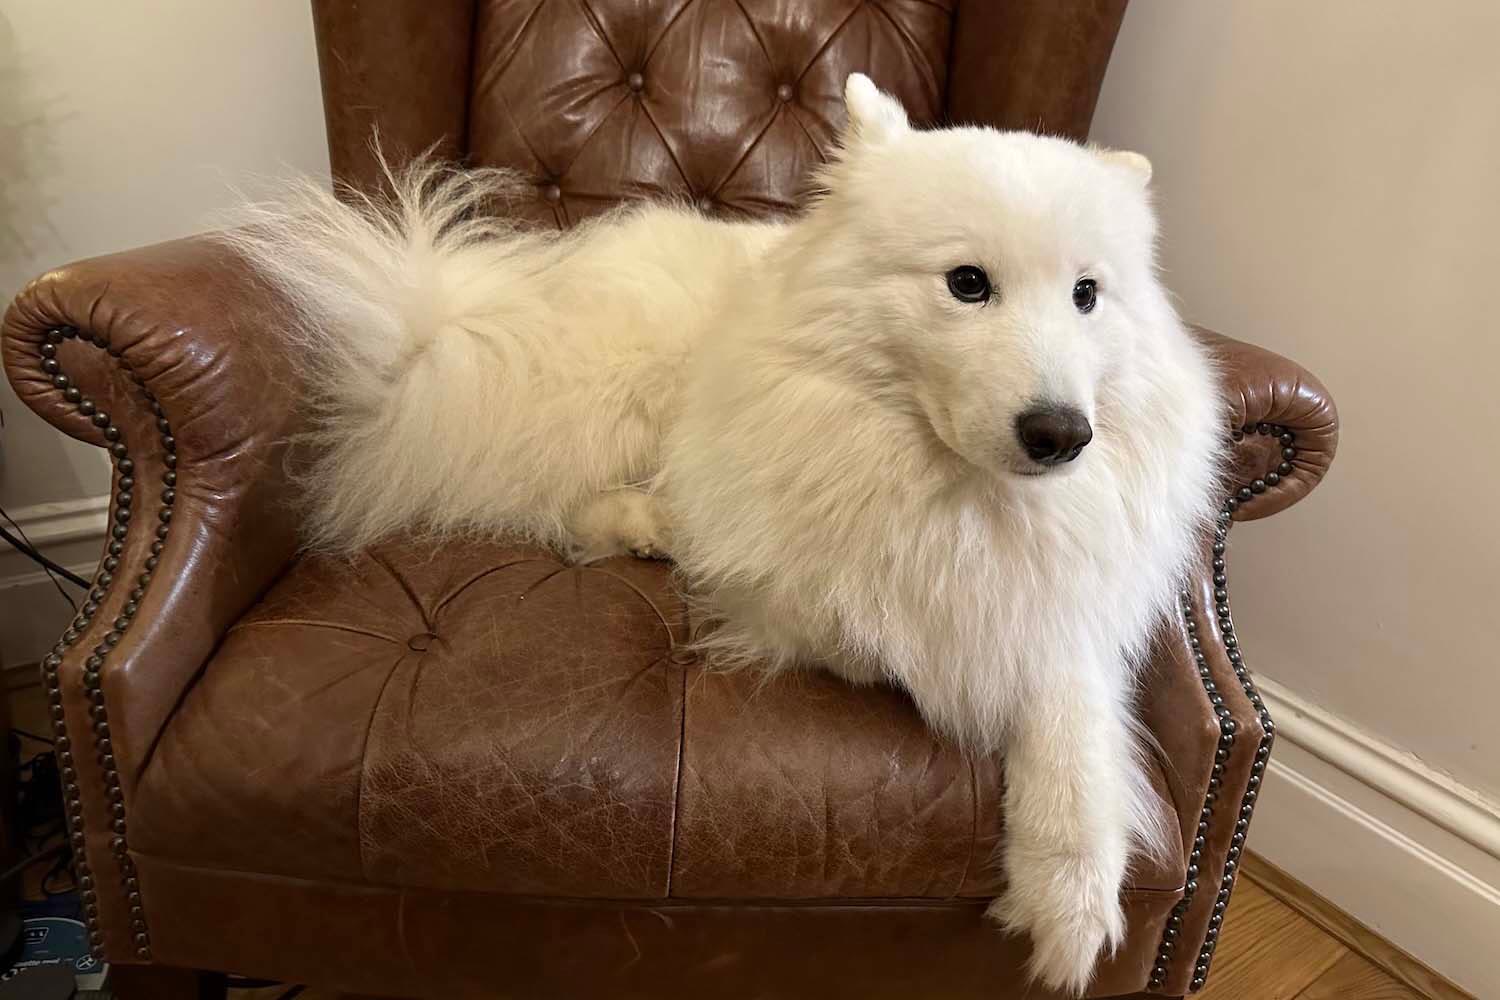 This is a picture of a chair, and not a dog.